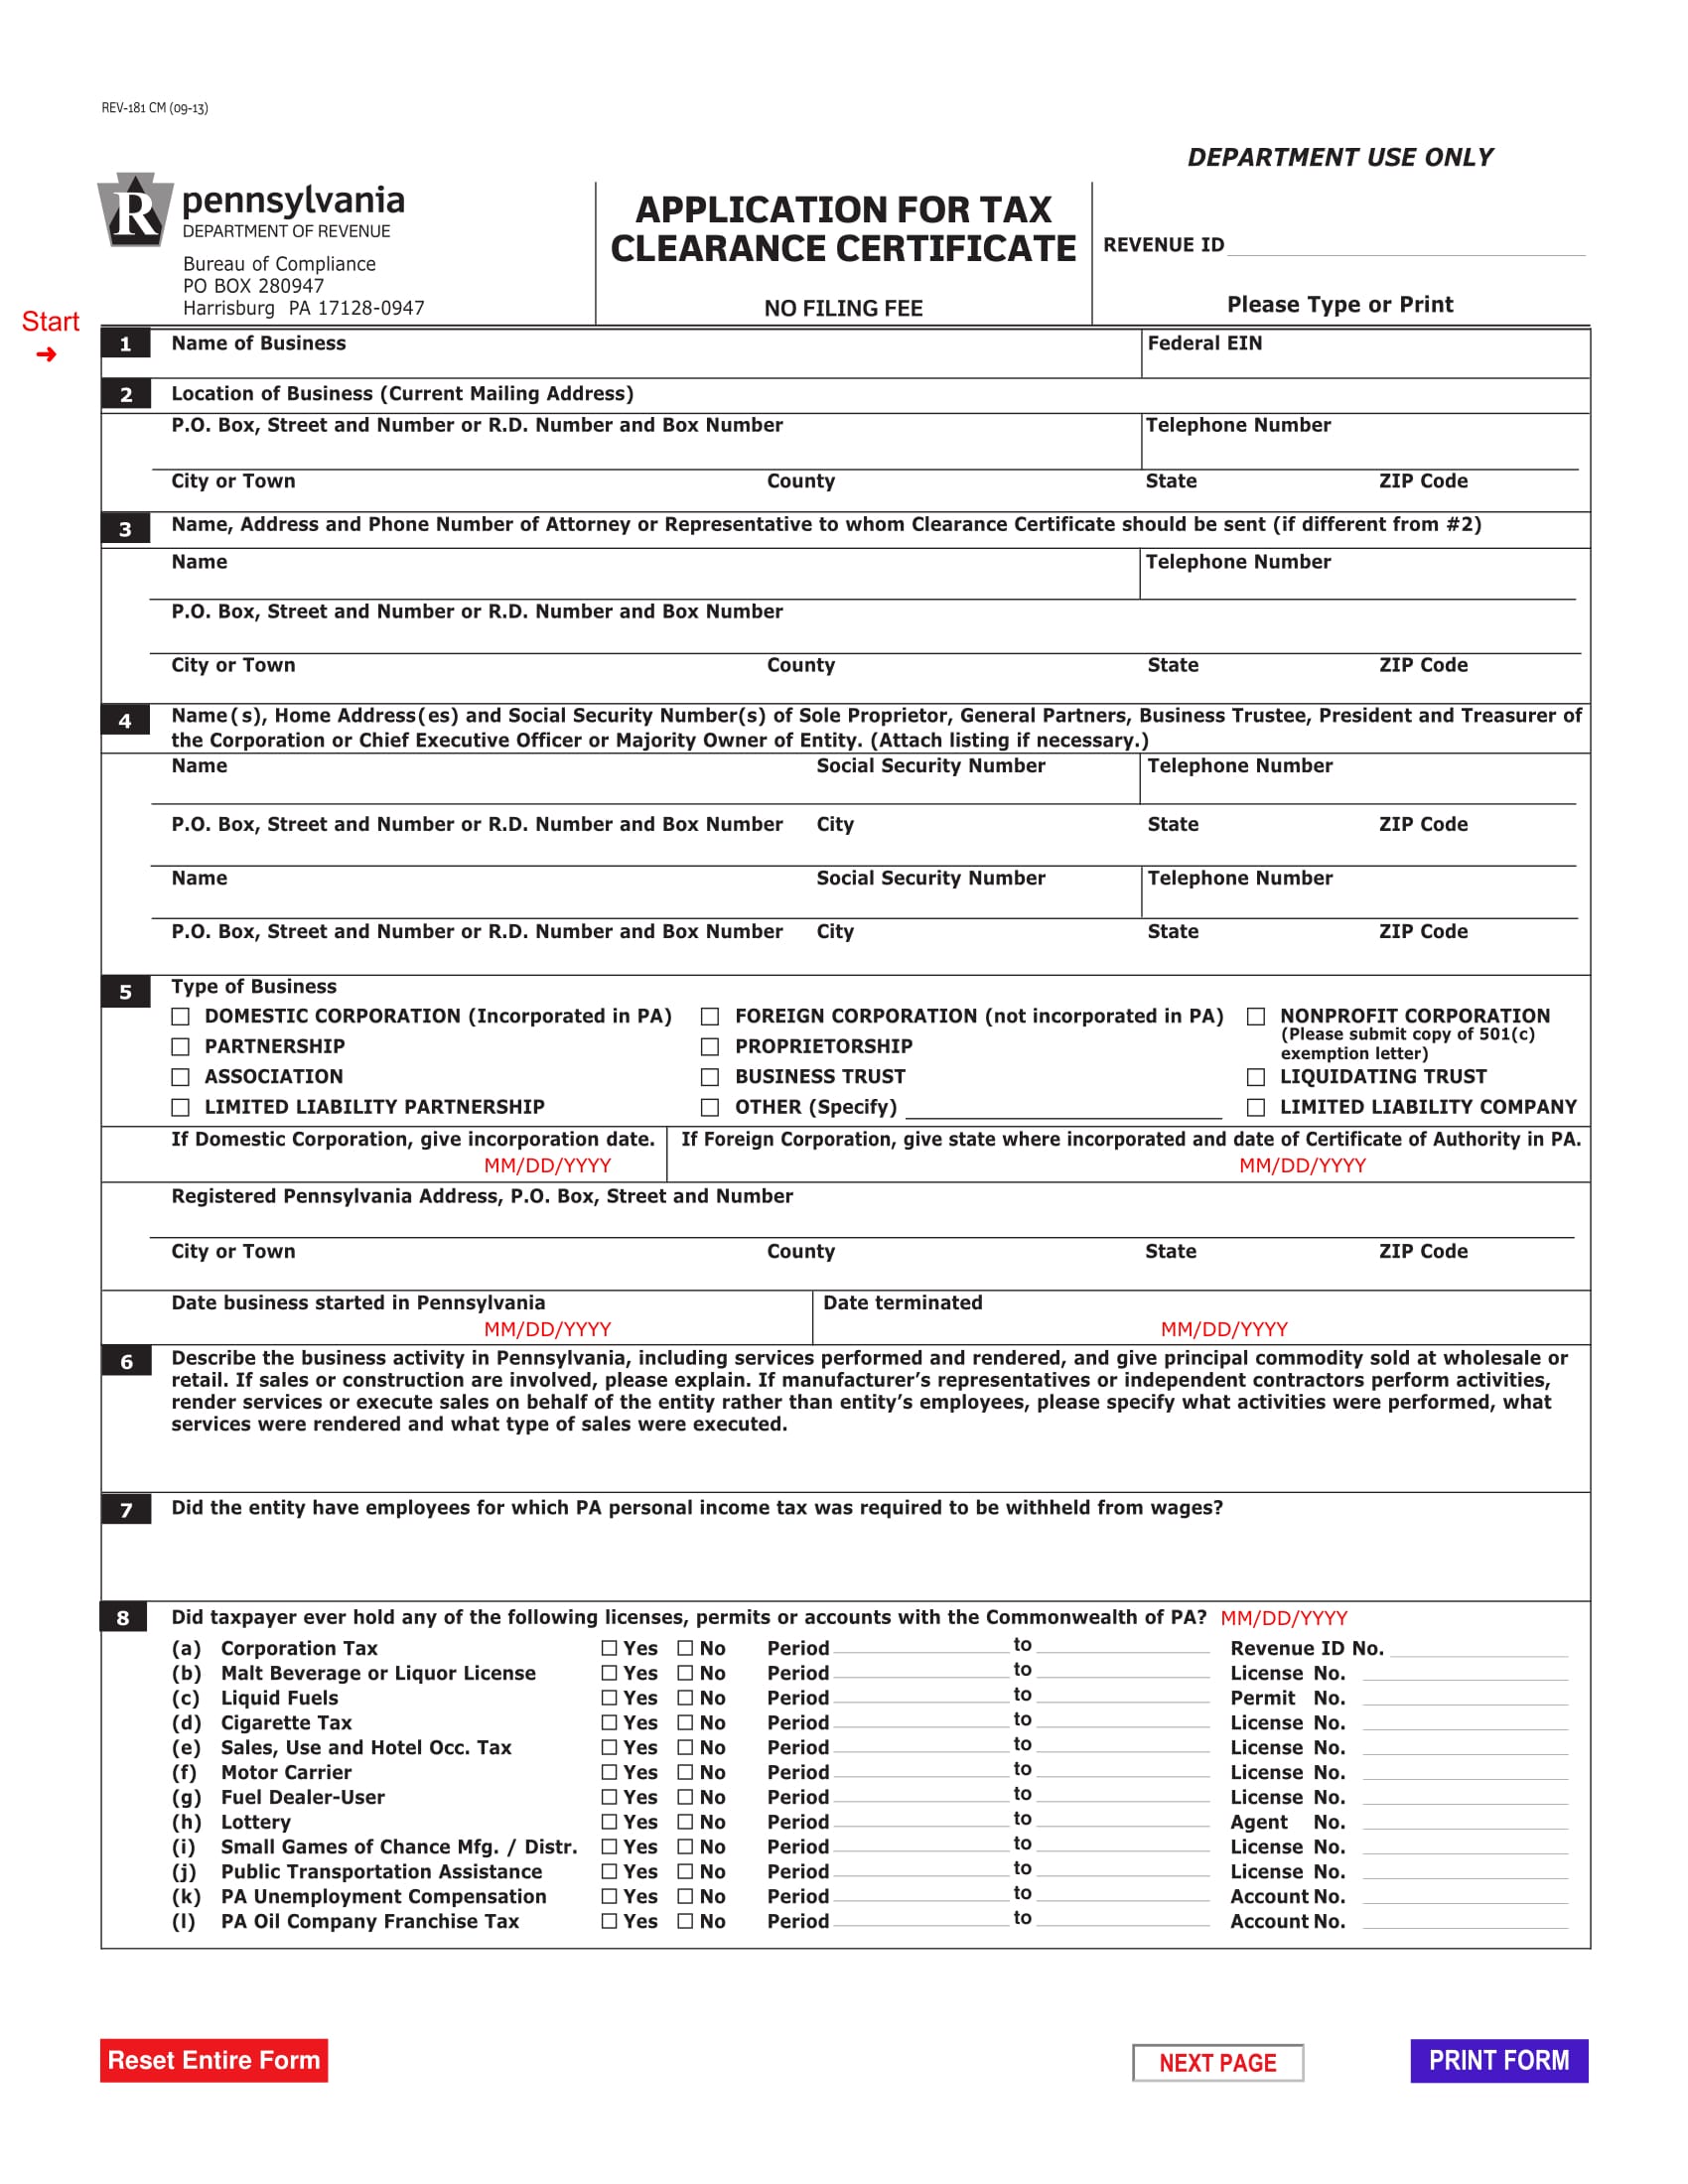 tax clearance certificate application form 1